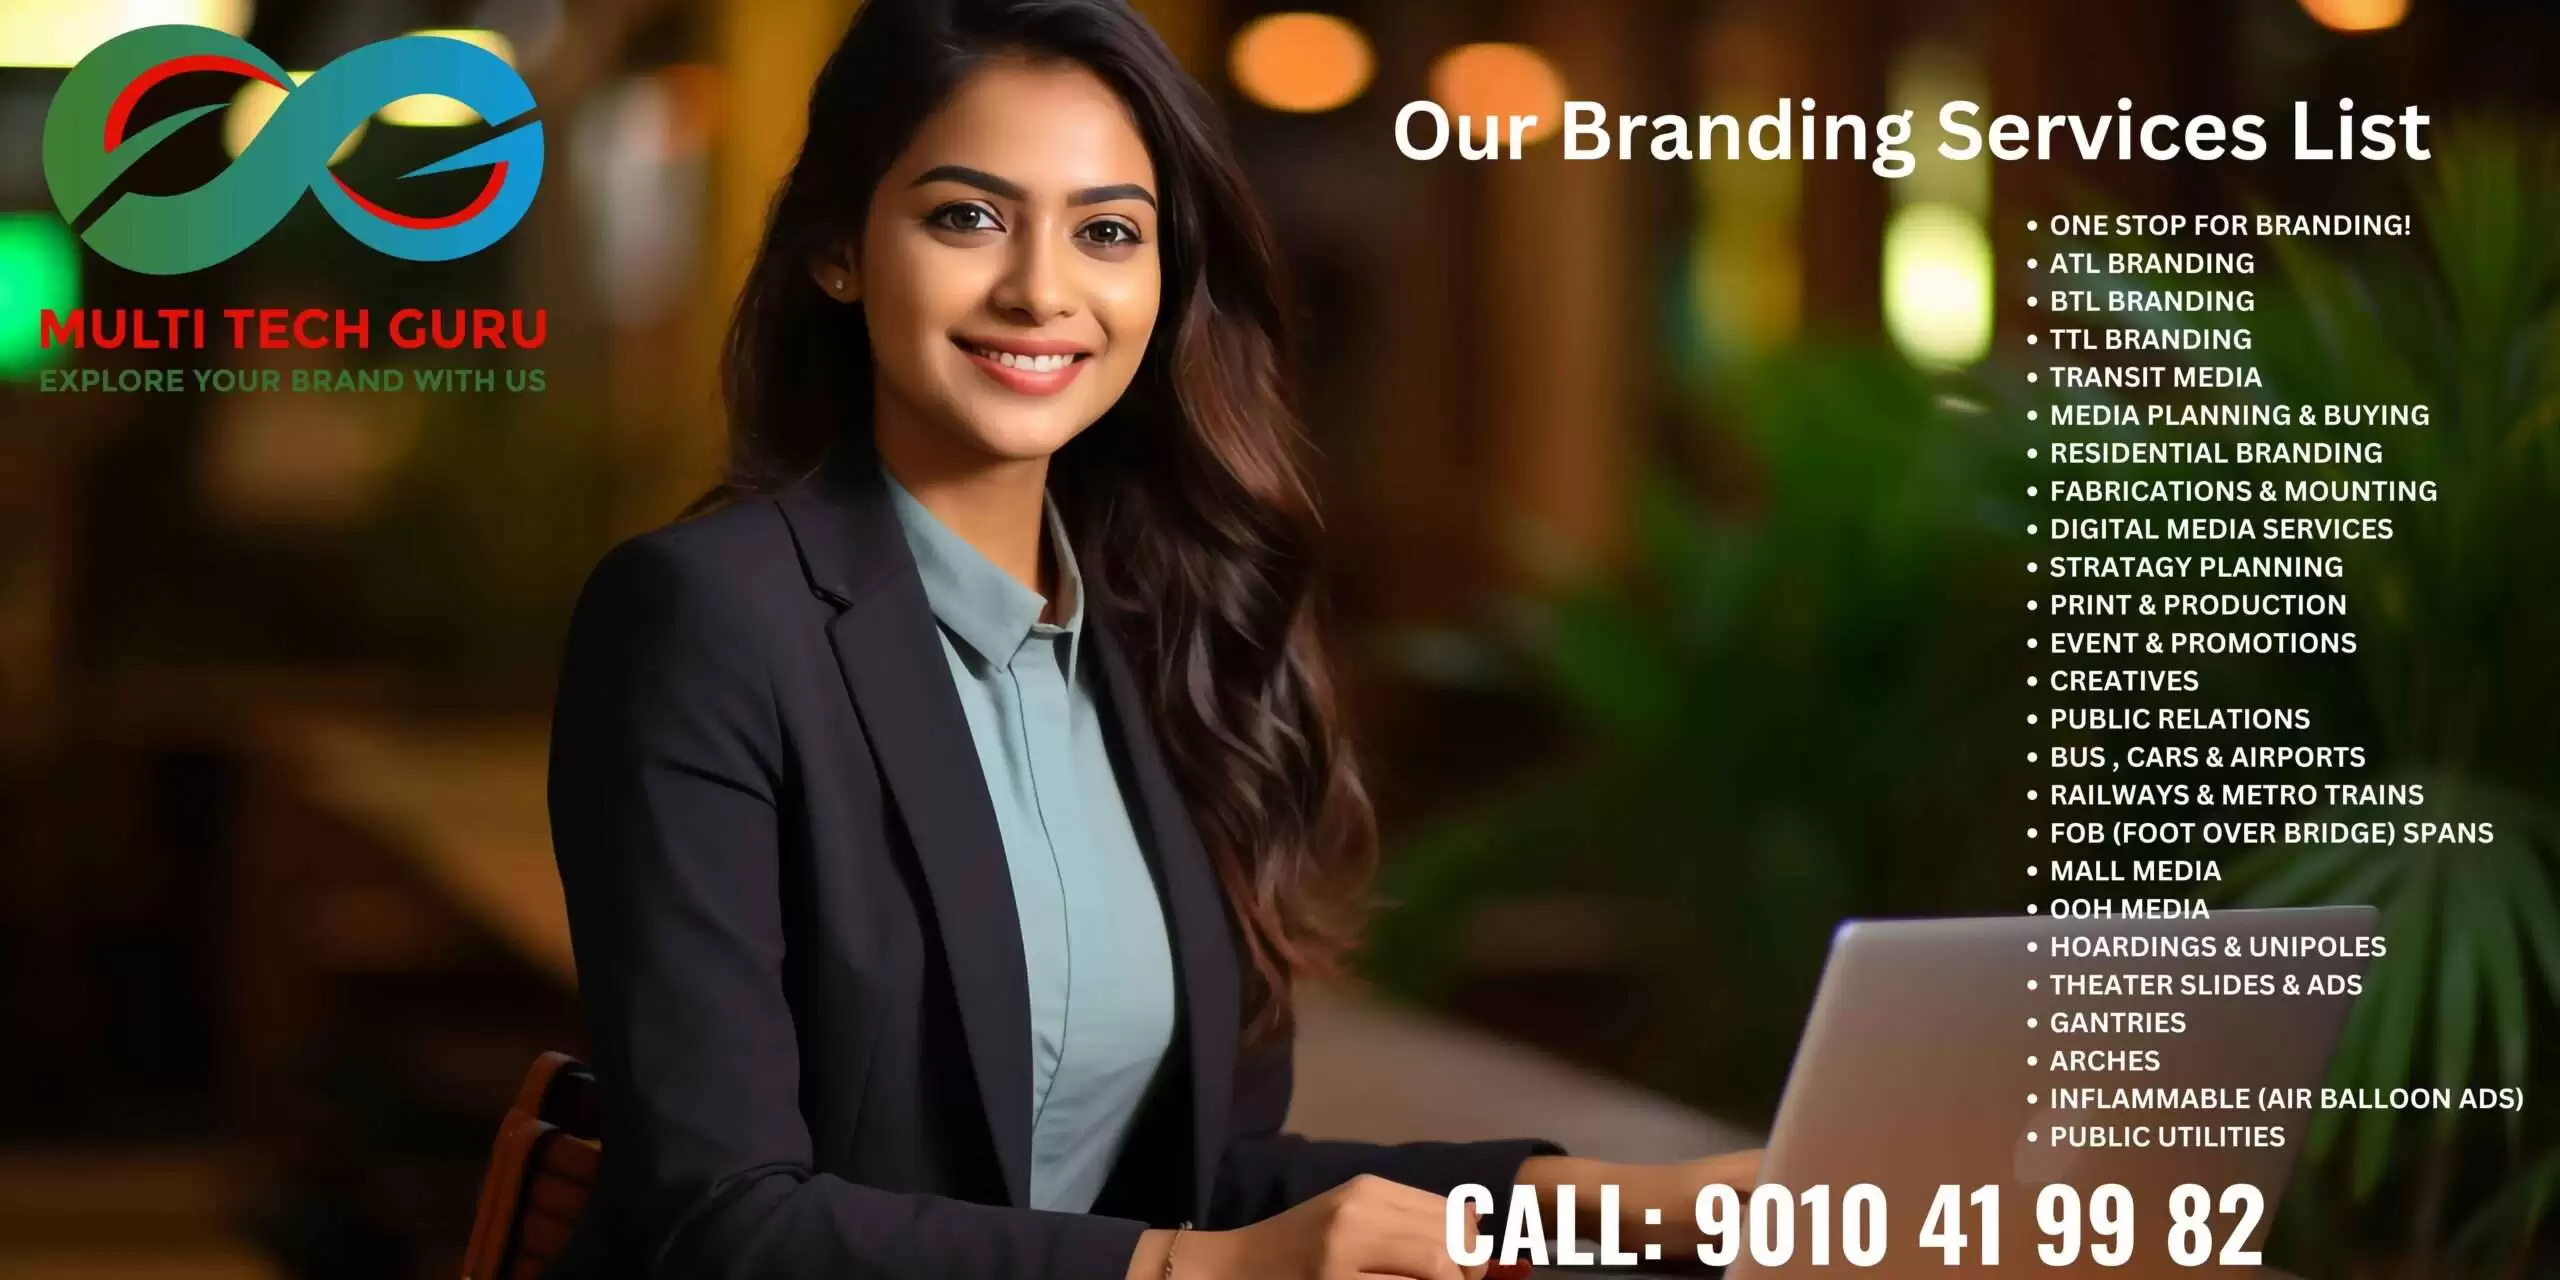 Branding Services List-Explore Your Brand With us-Multitechguru.com-9010419982- advertising-branding-marketing-sales-design-print and electronic media services